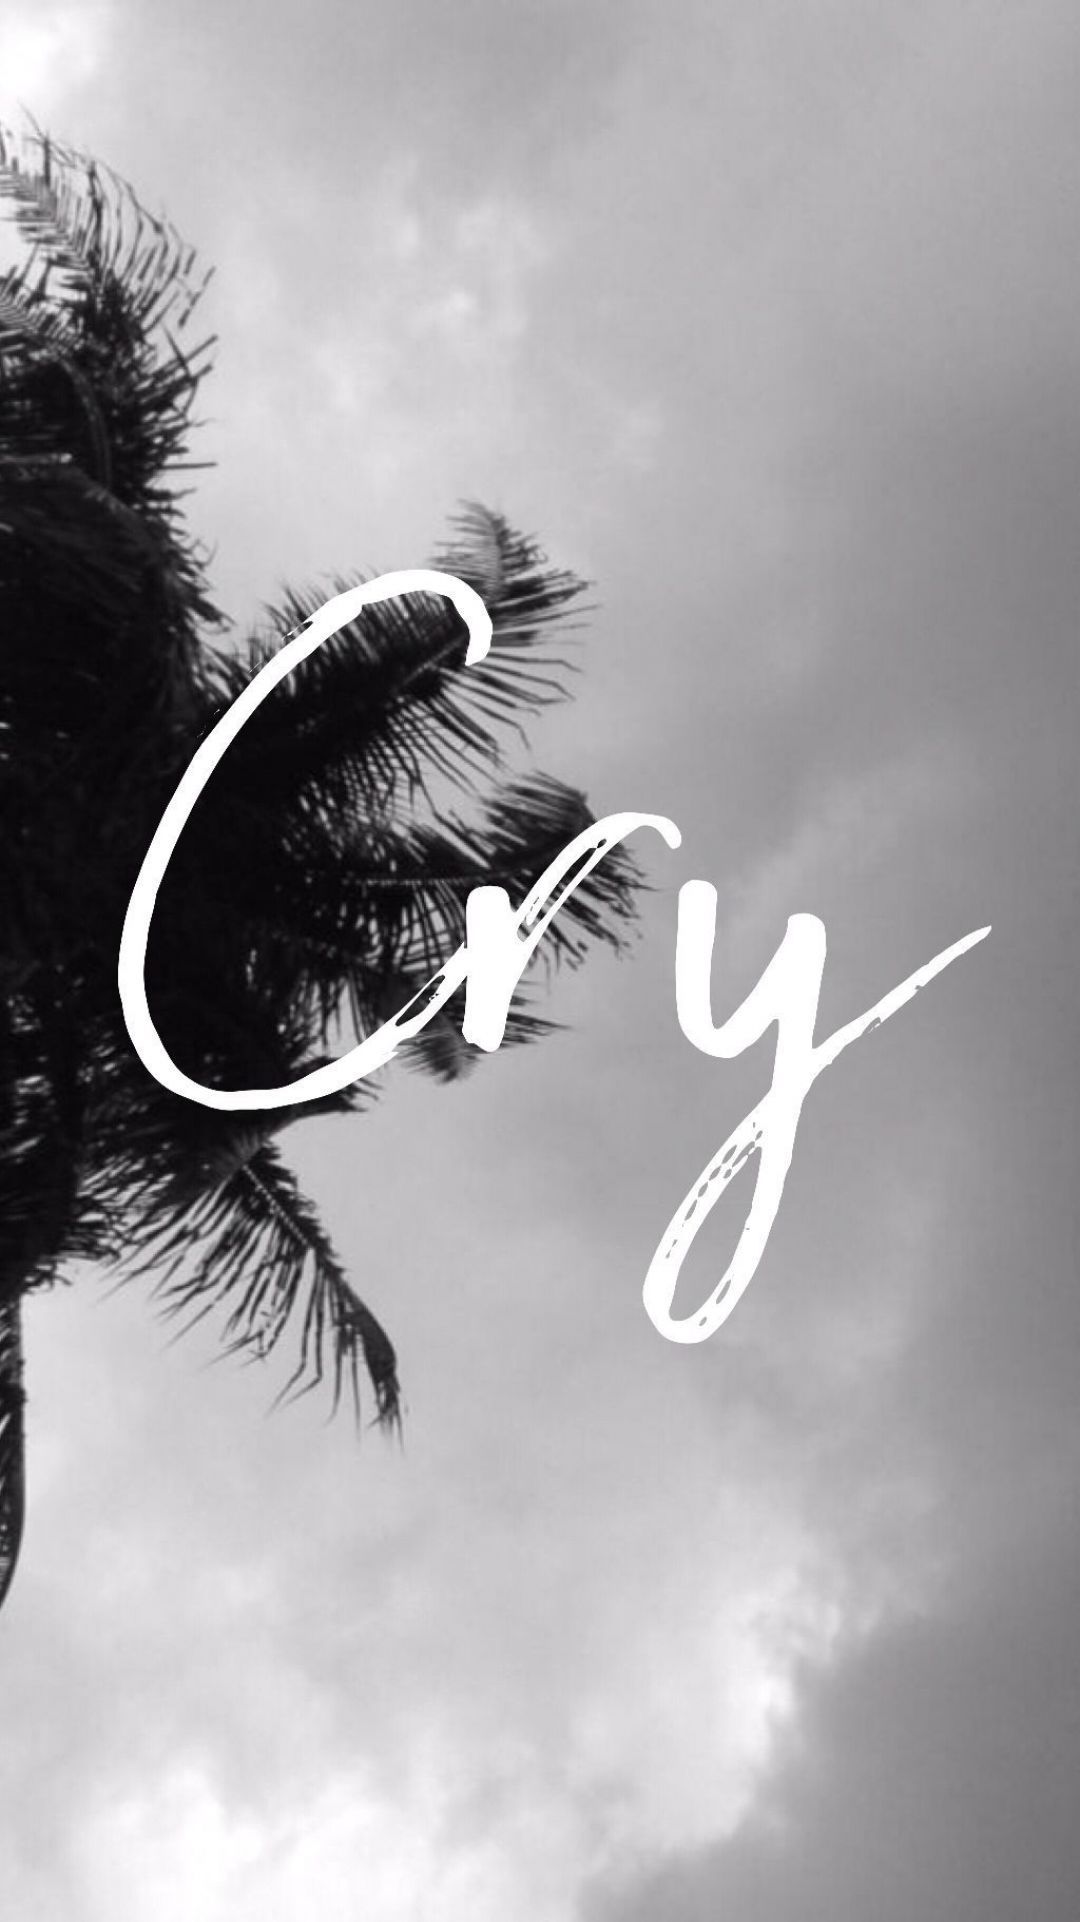 A black and white photo of palm trees with the word cry - Black and white, gray